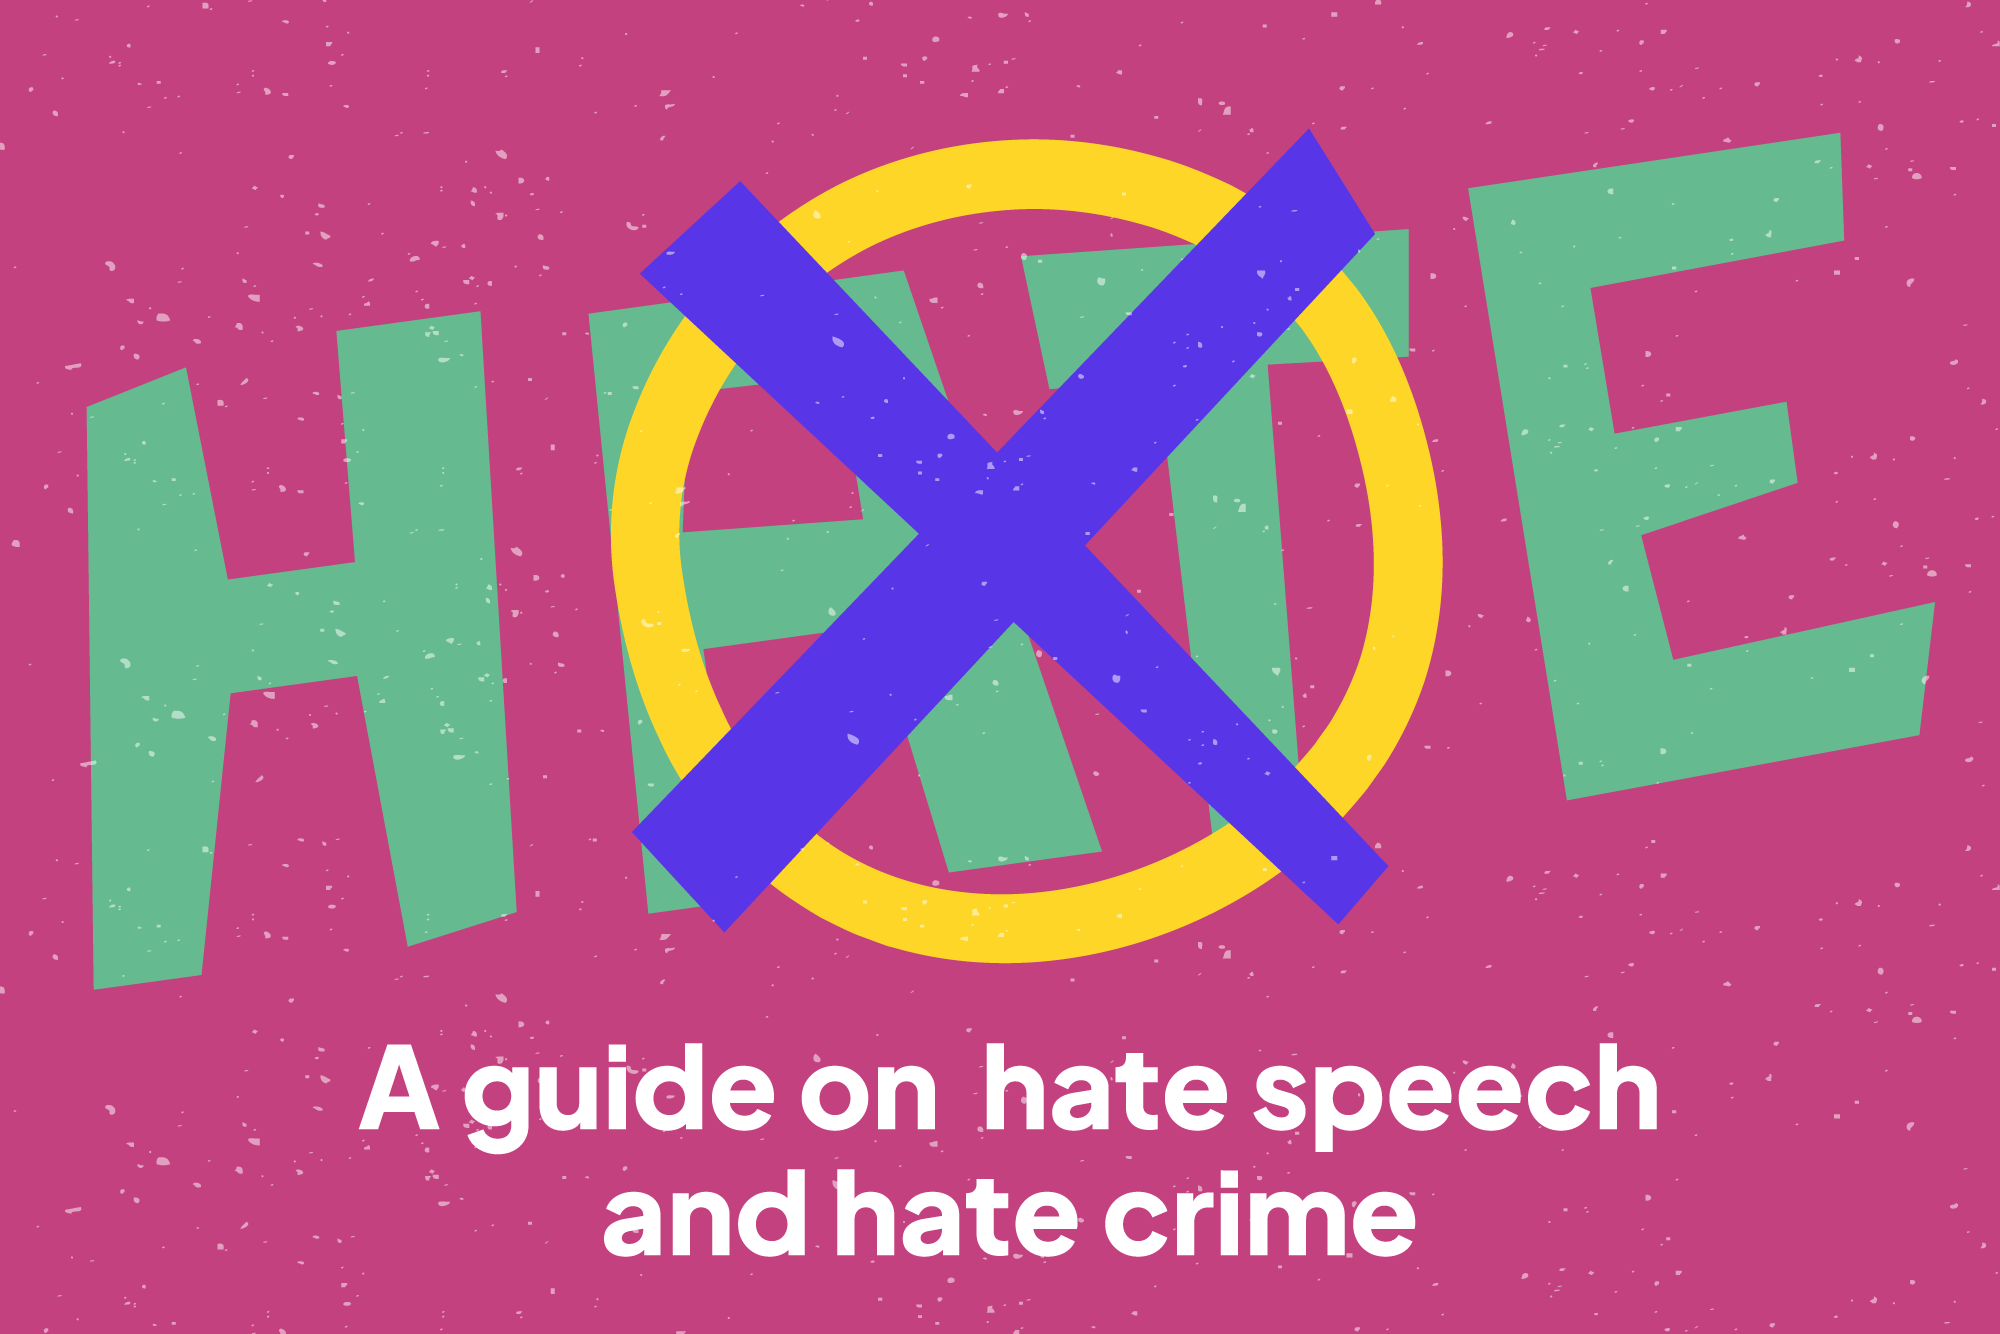 A guide on hate speech and hate crime